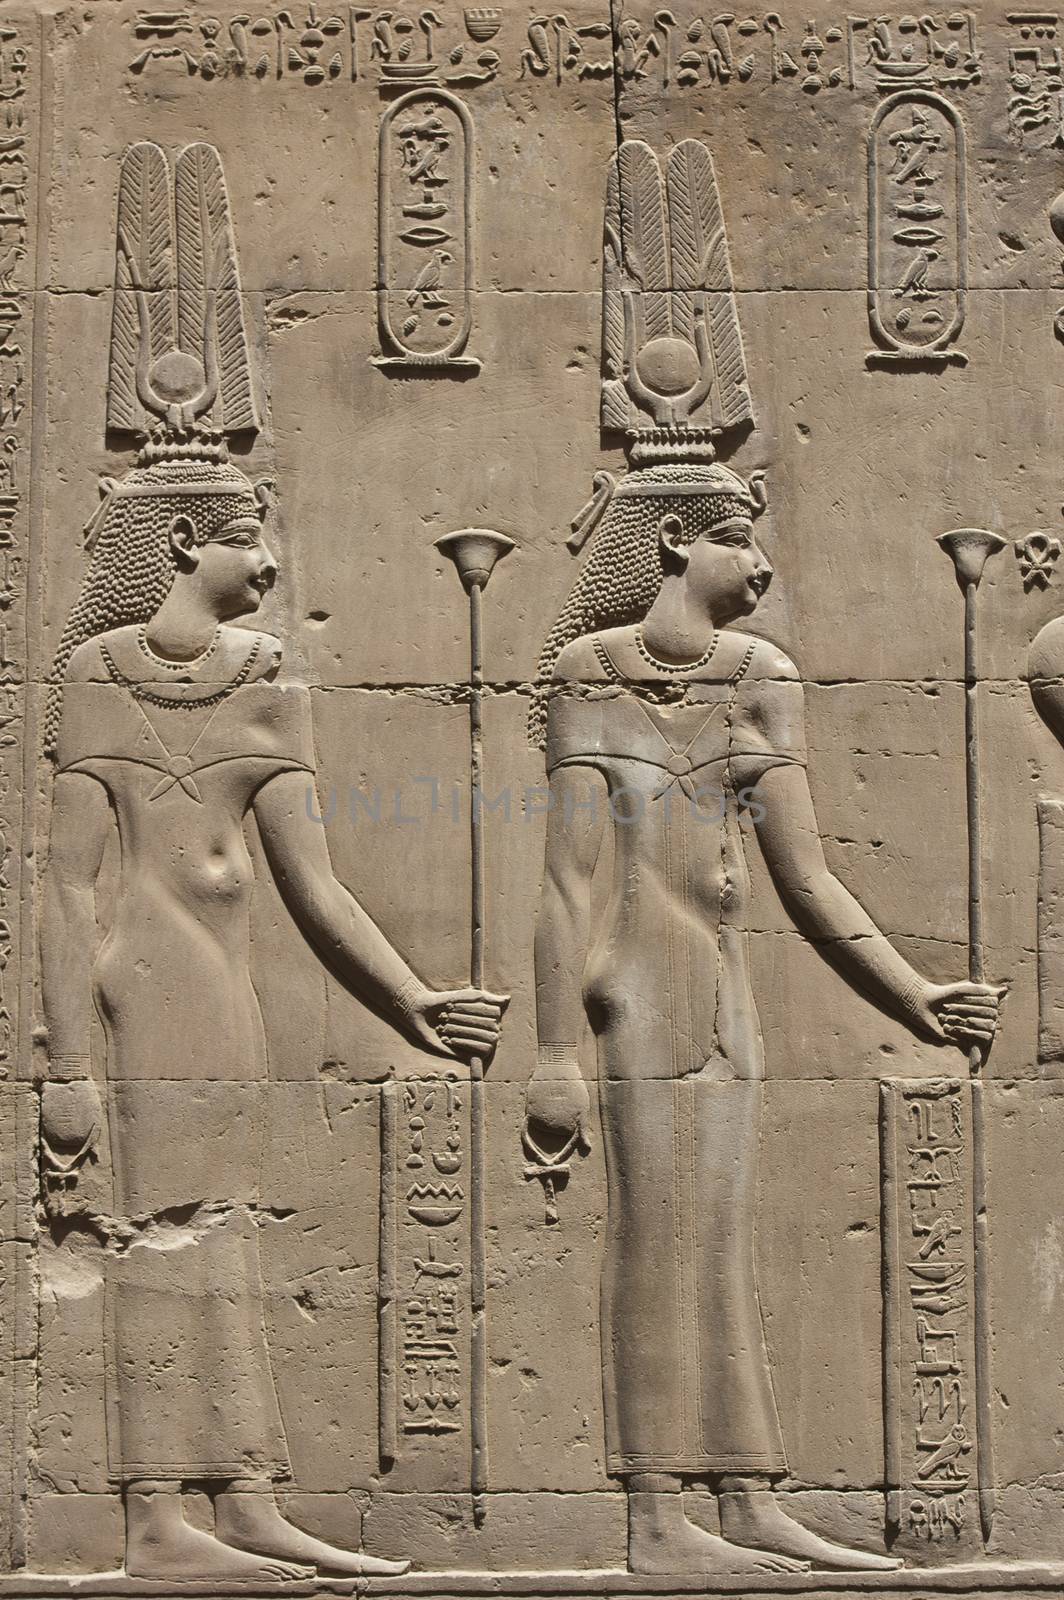 Egyptian hieroglyphic carvings on a wall at the Temple of Kom Ombo